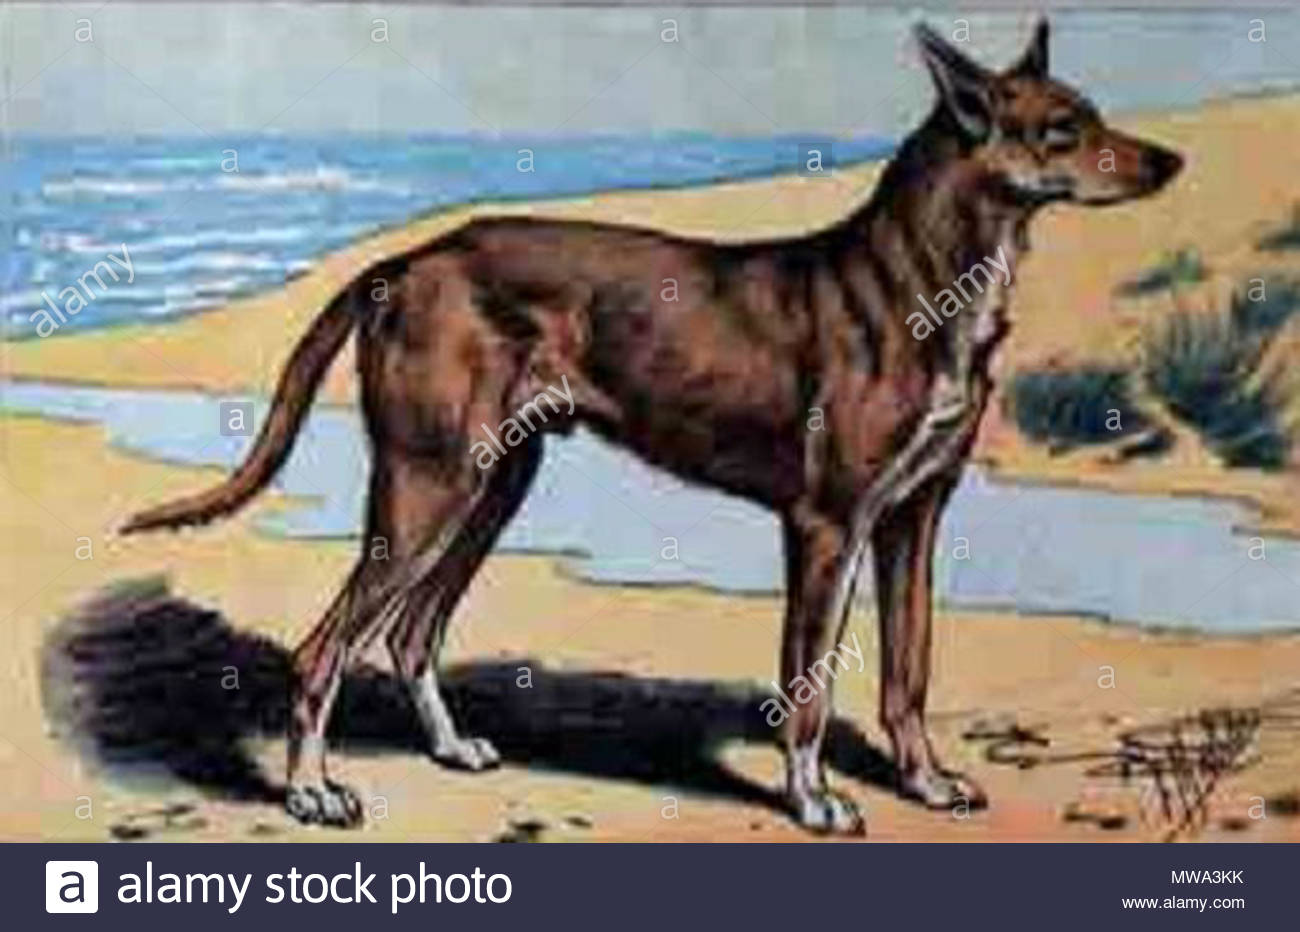 english a dog from the breed charnaigre of provence france disapeared at the beginning of xxth century franais chien de race charnaigre en provence france disparu au dbut du xxe sicle 27 february 2008 arsne lapin 124 charnaigre MWA3KK